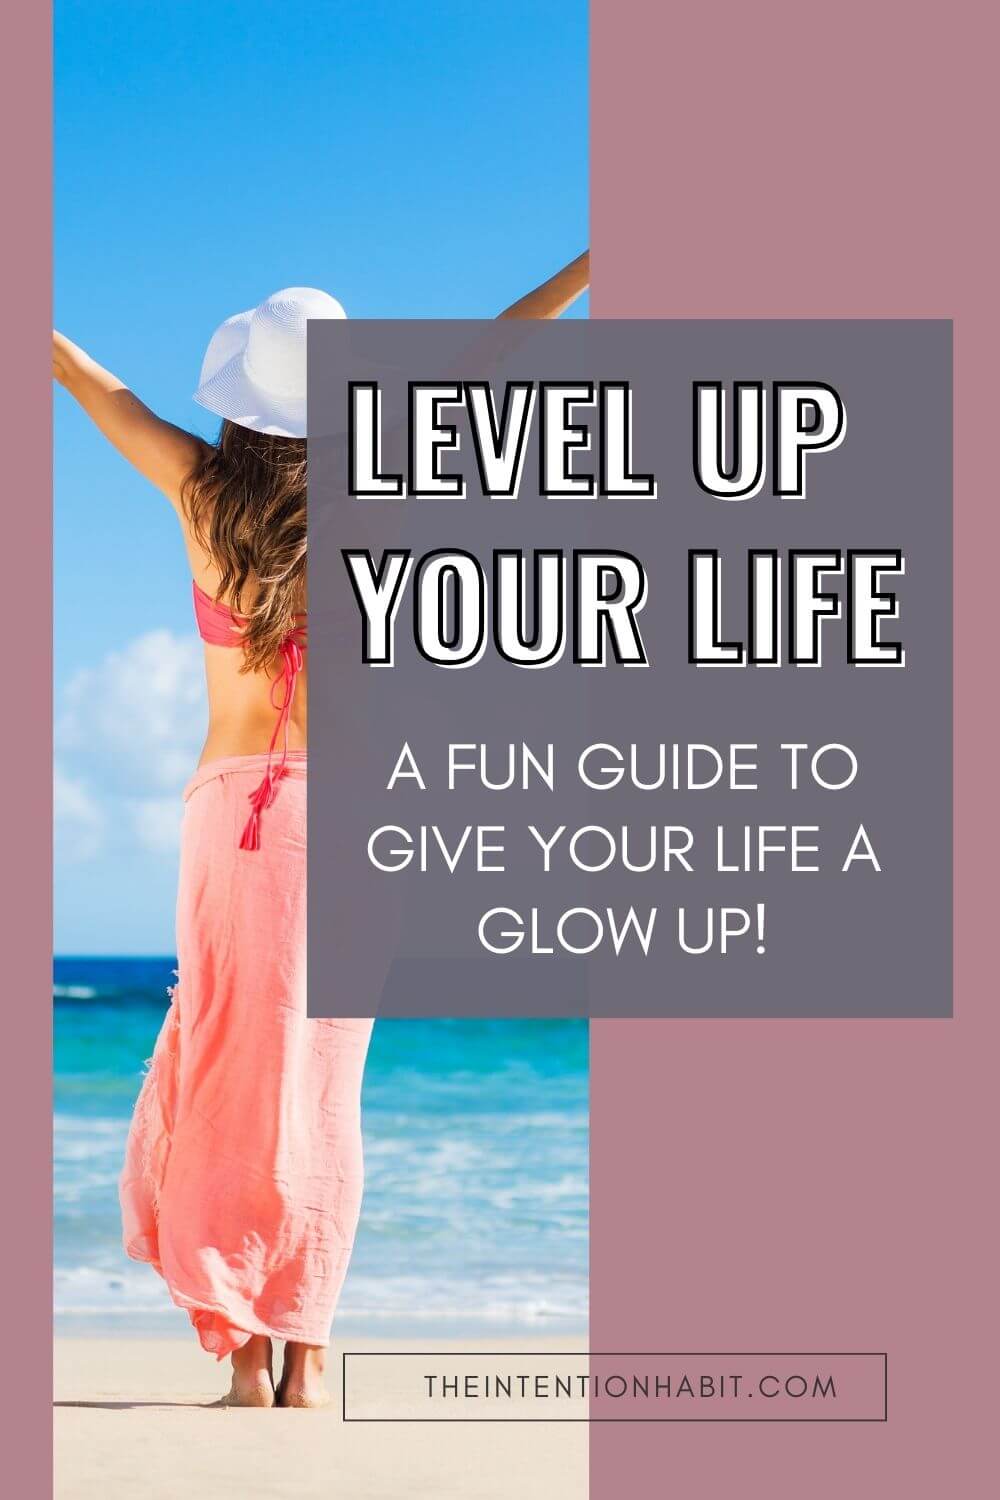 level up your life a fun guide to give your life a glow up.